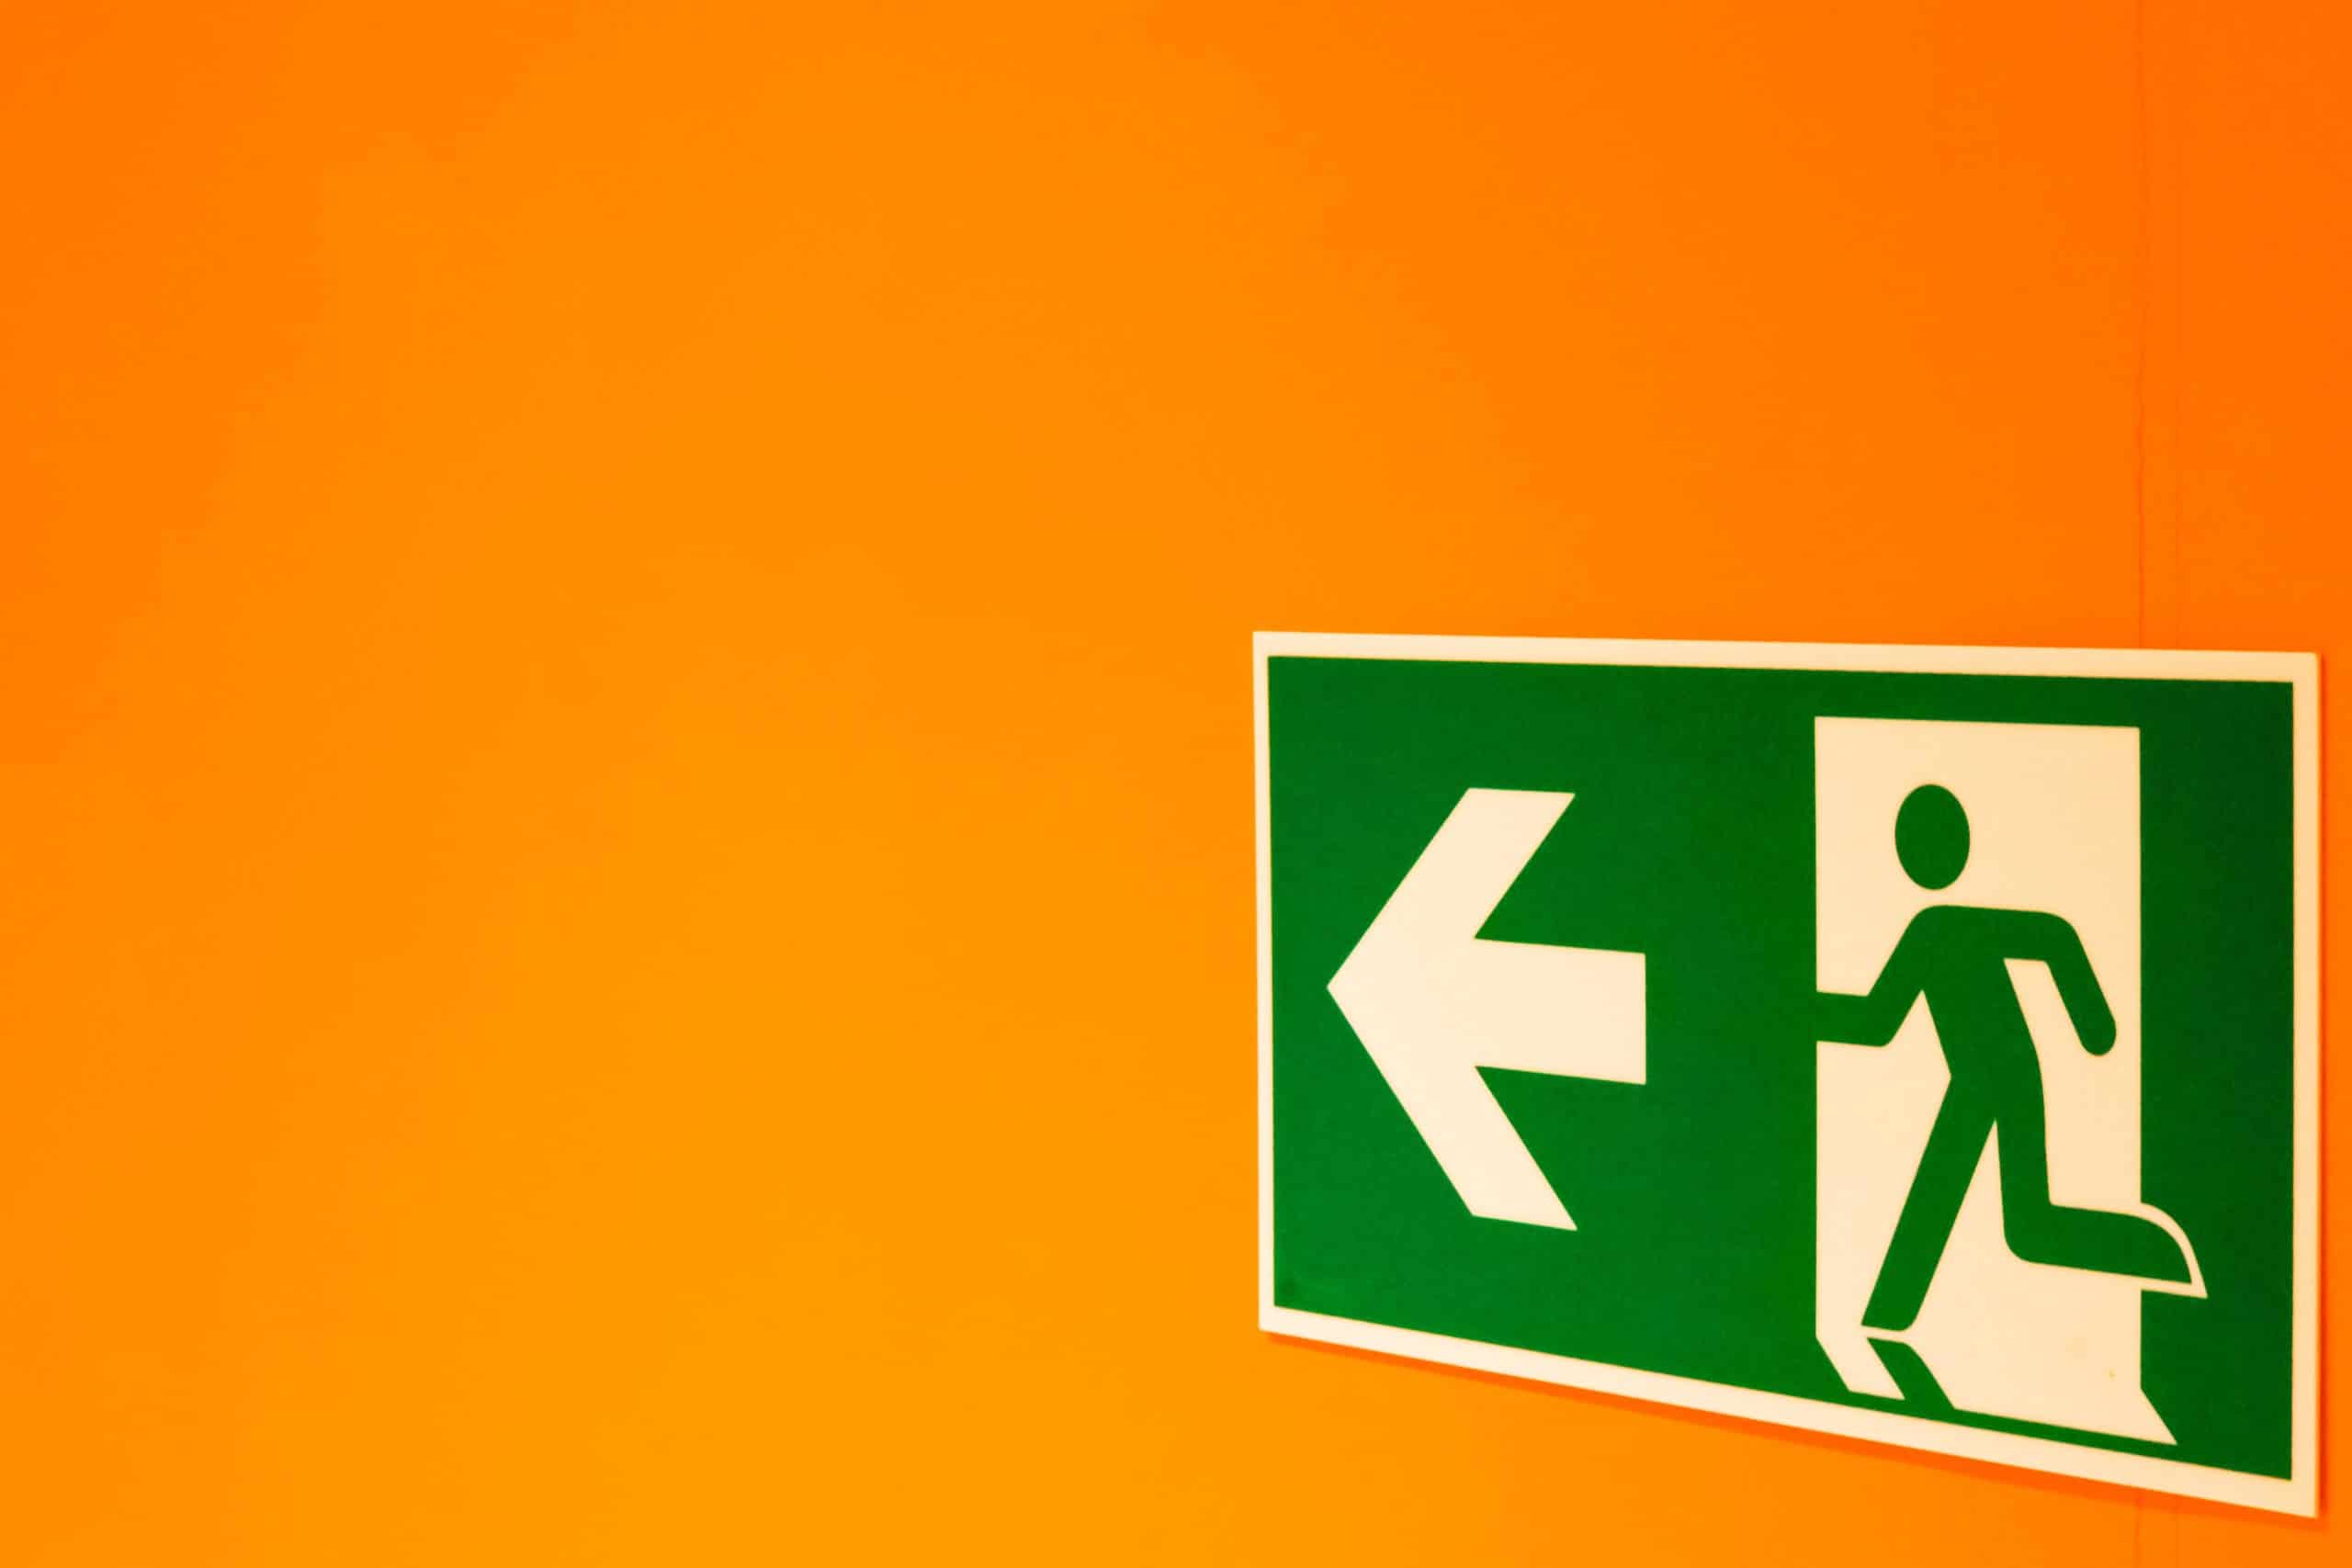 green escape route sign on an orange wall